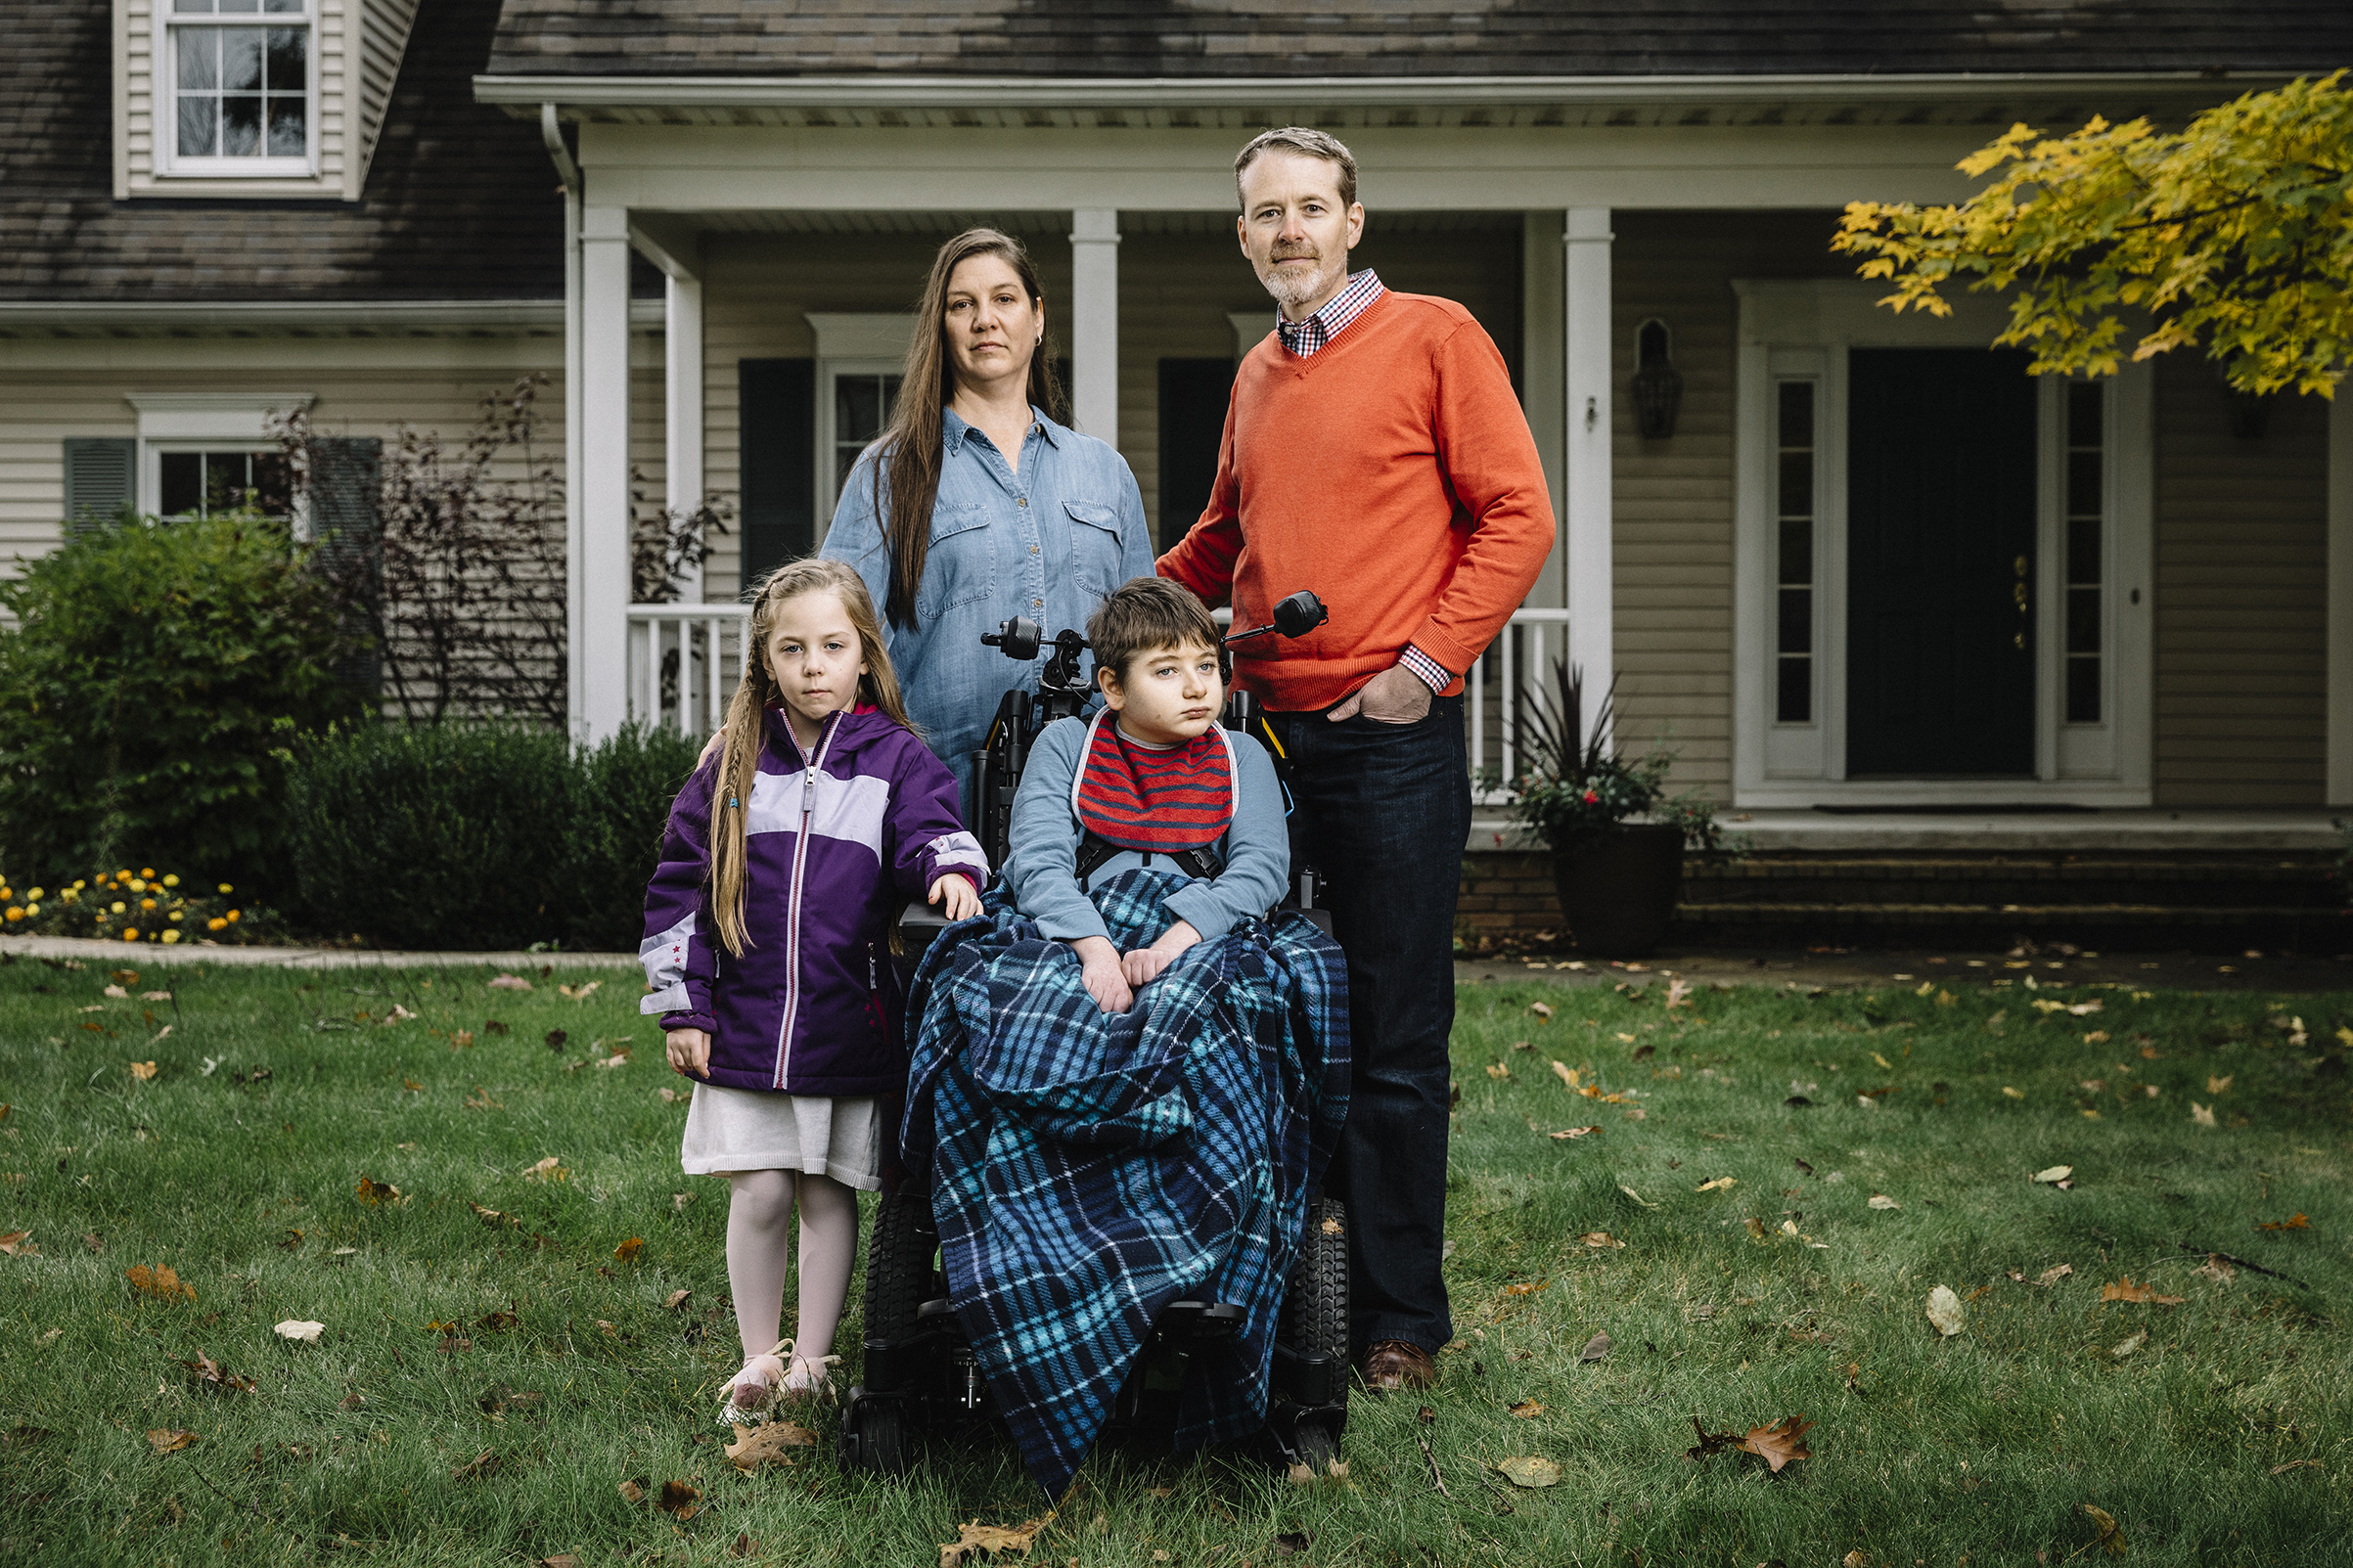 Christine and Larry Callahan, with kids Claire, 5, and Andrew, 11, in front of their home in Cleveland’s northeast suburbs (William Widmer—Redux for TIME)